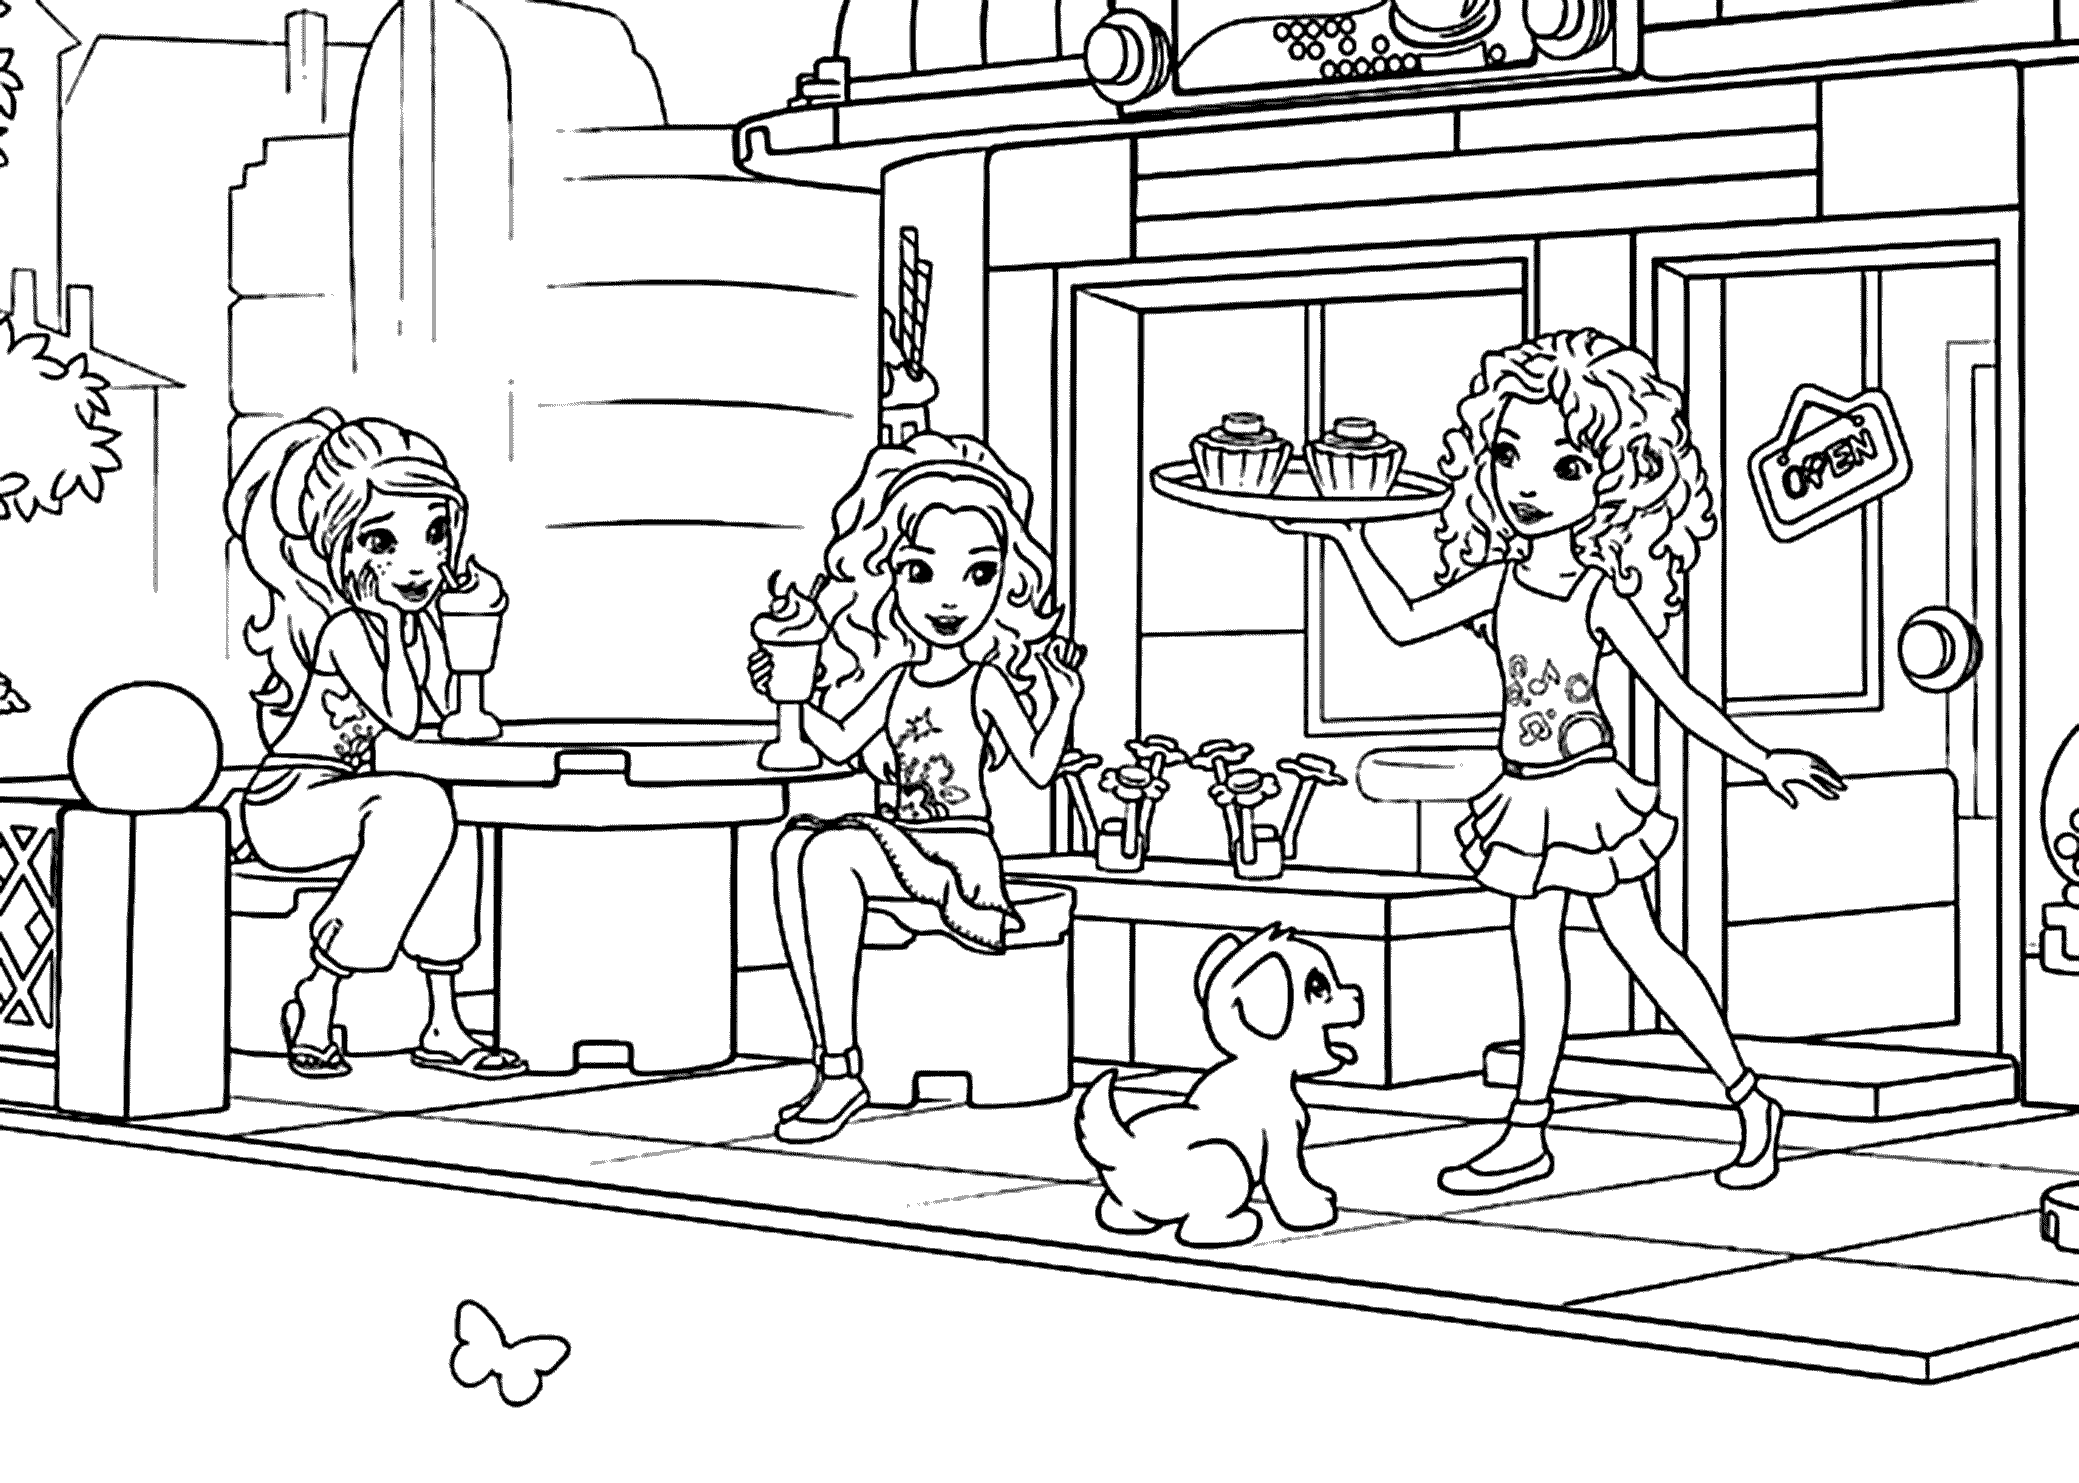 Download Lego Friends Coloring Pages - Best Coloring Pages For Kids